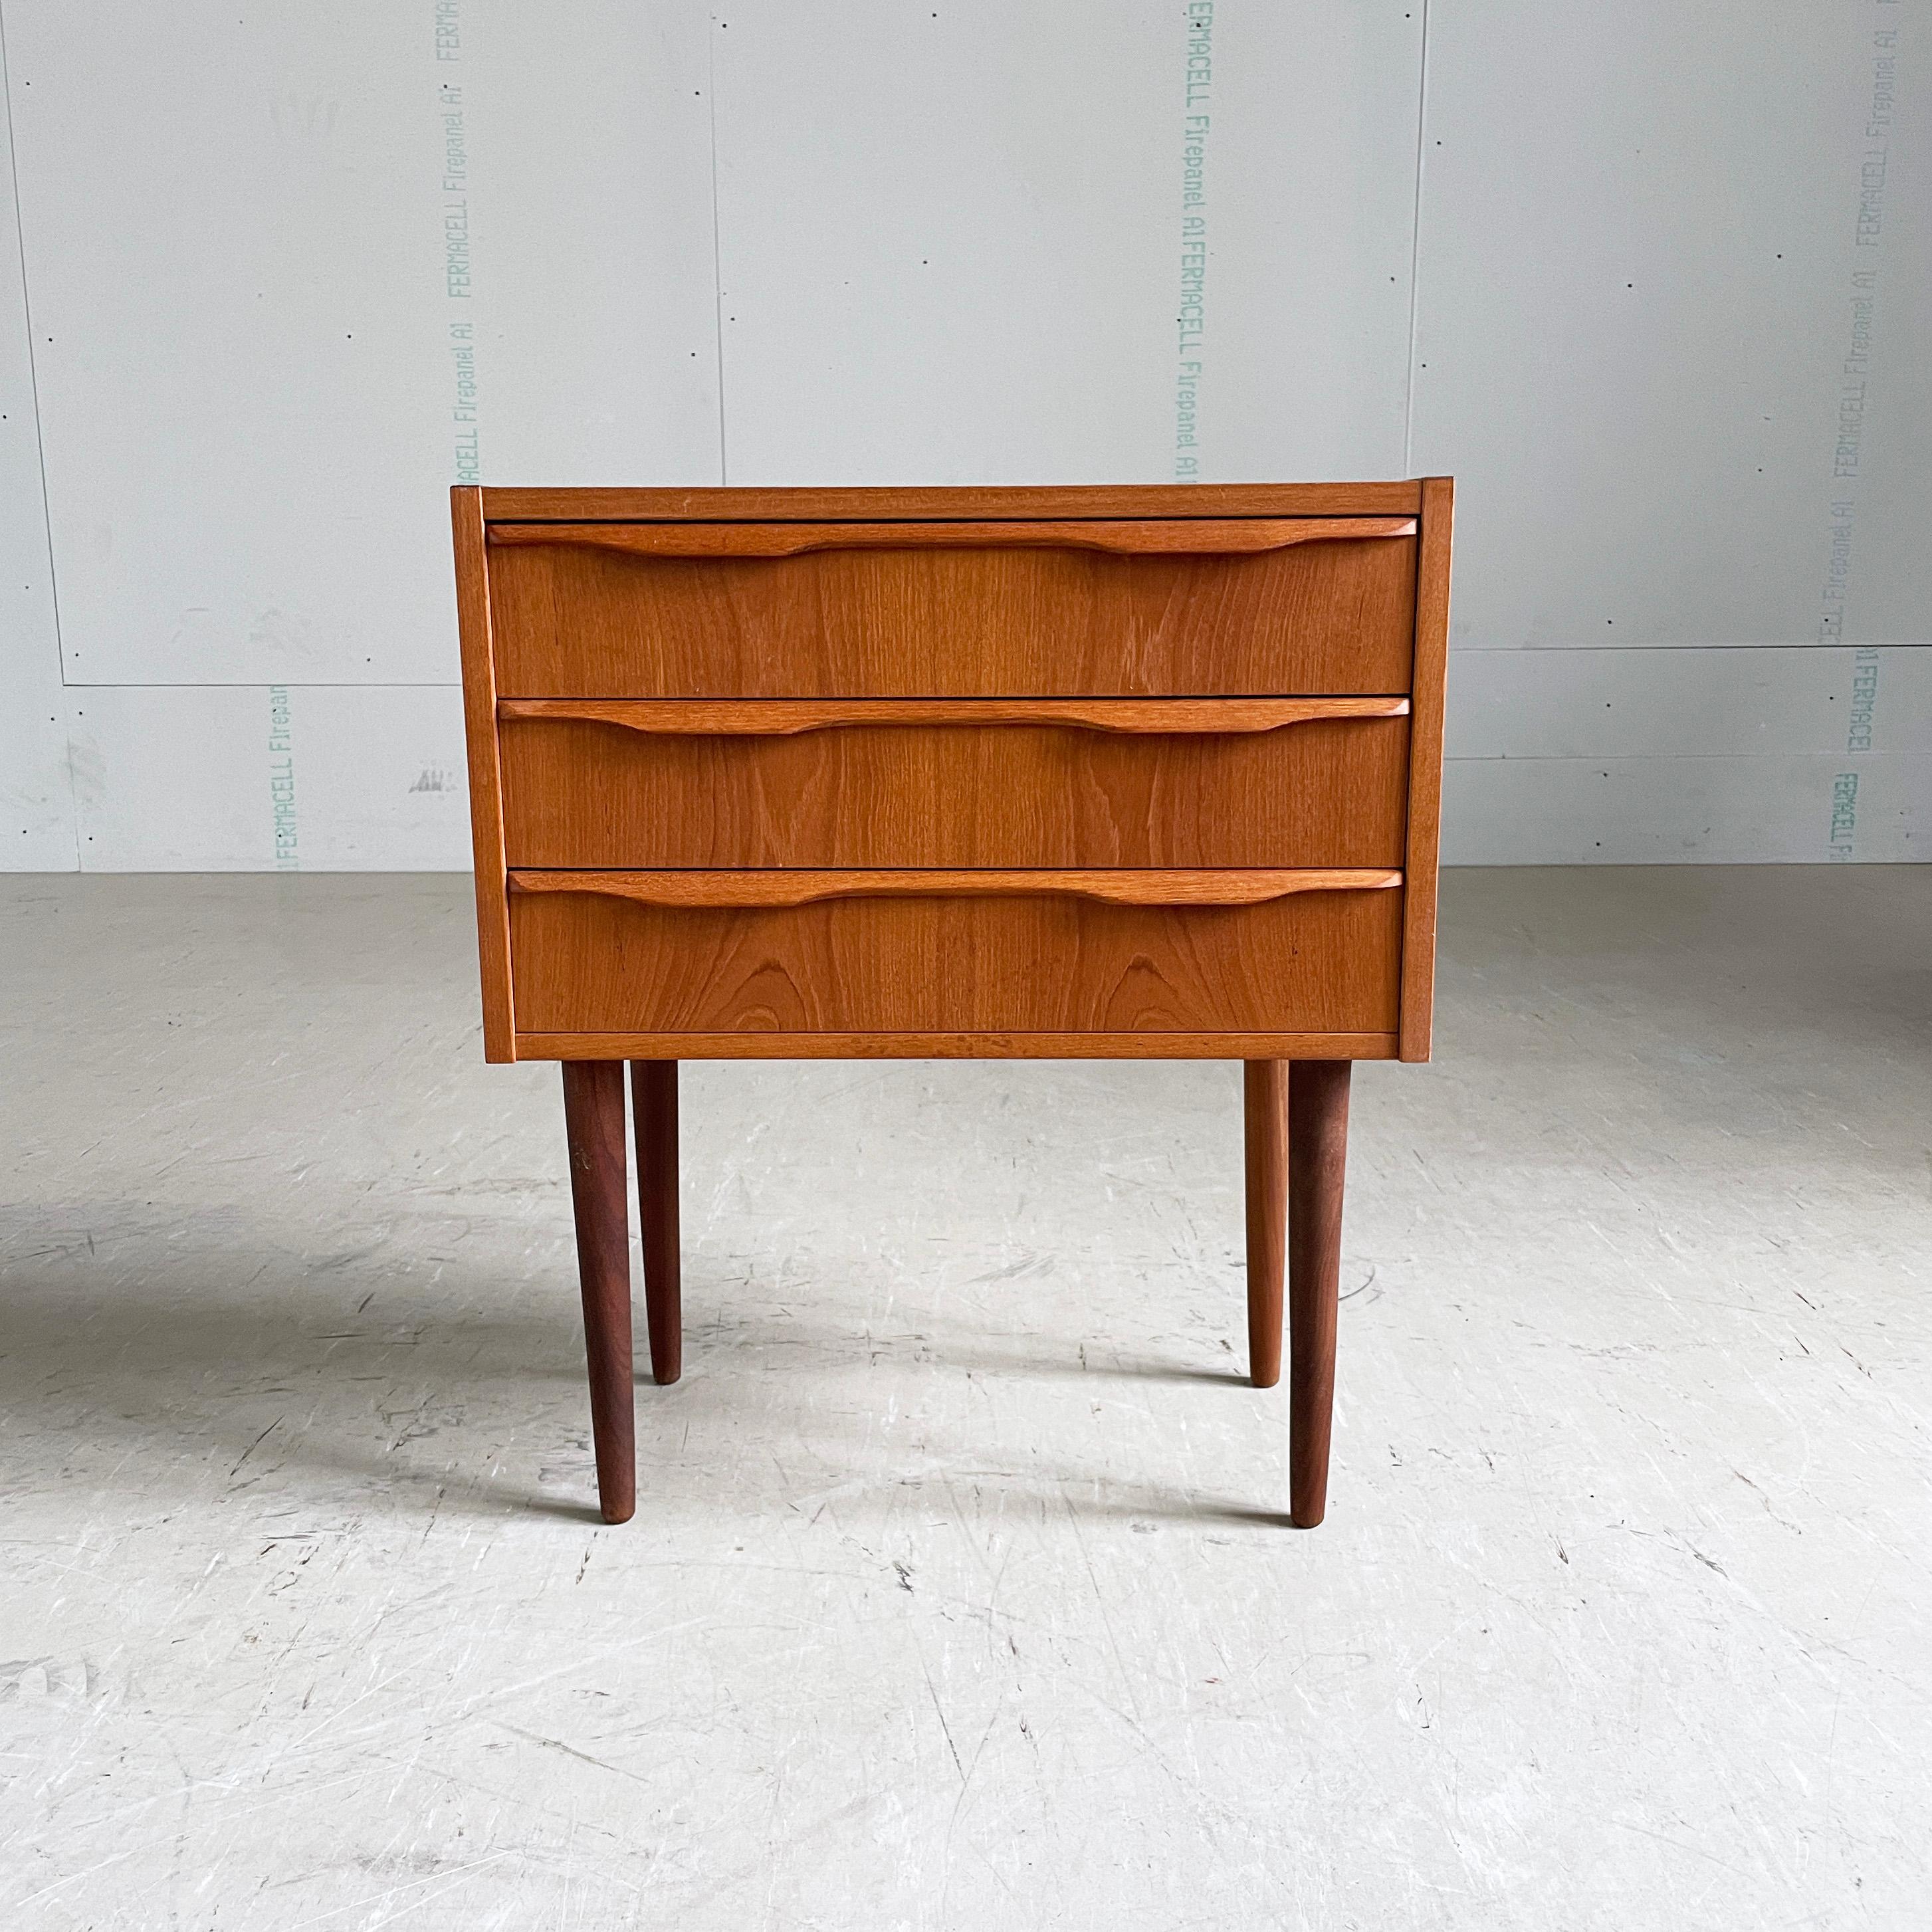 Mid Century teak bedside cabinet / chest of drawers. Teak veneer with solid teak legs. Three drawers with beautiful detailing to handles. 
Origin unconfirmed, possibly Danish. Produced ca. 1960. 